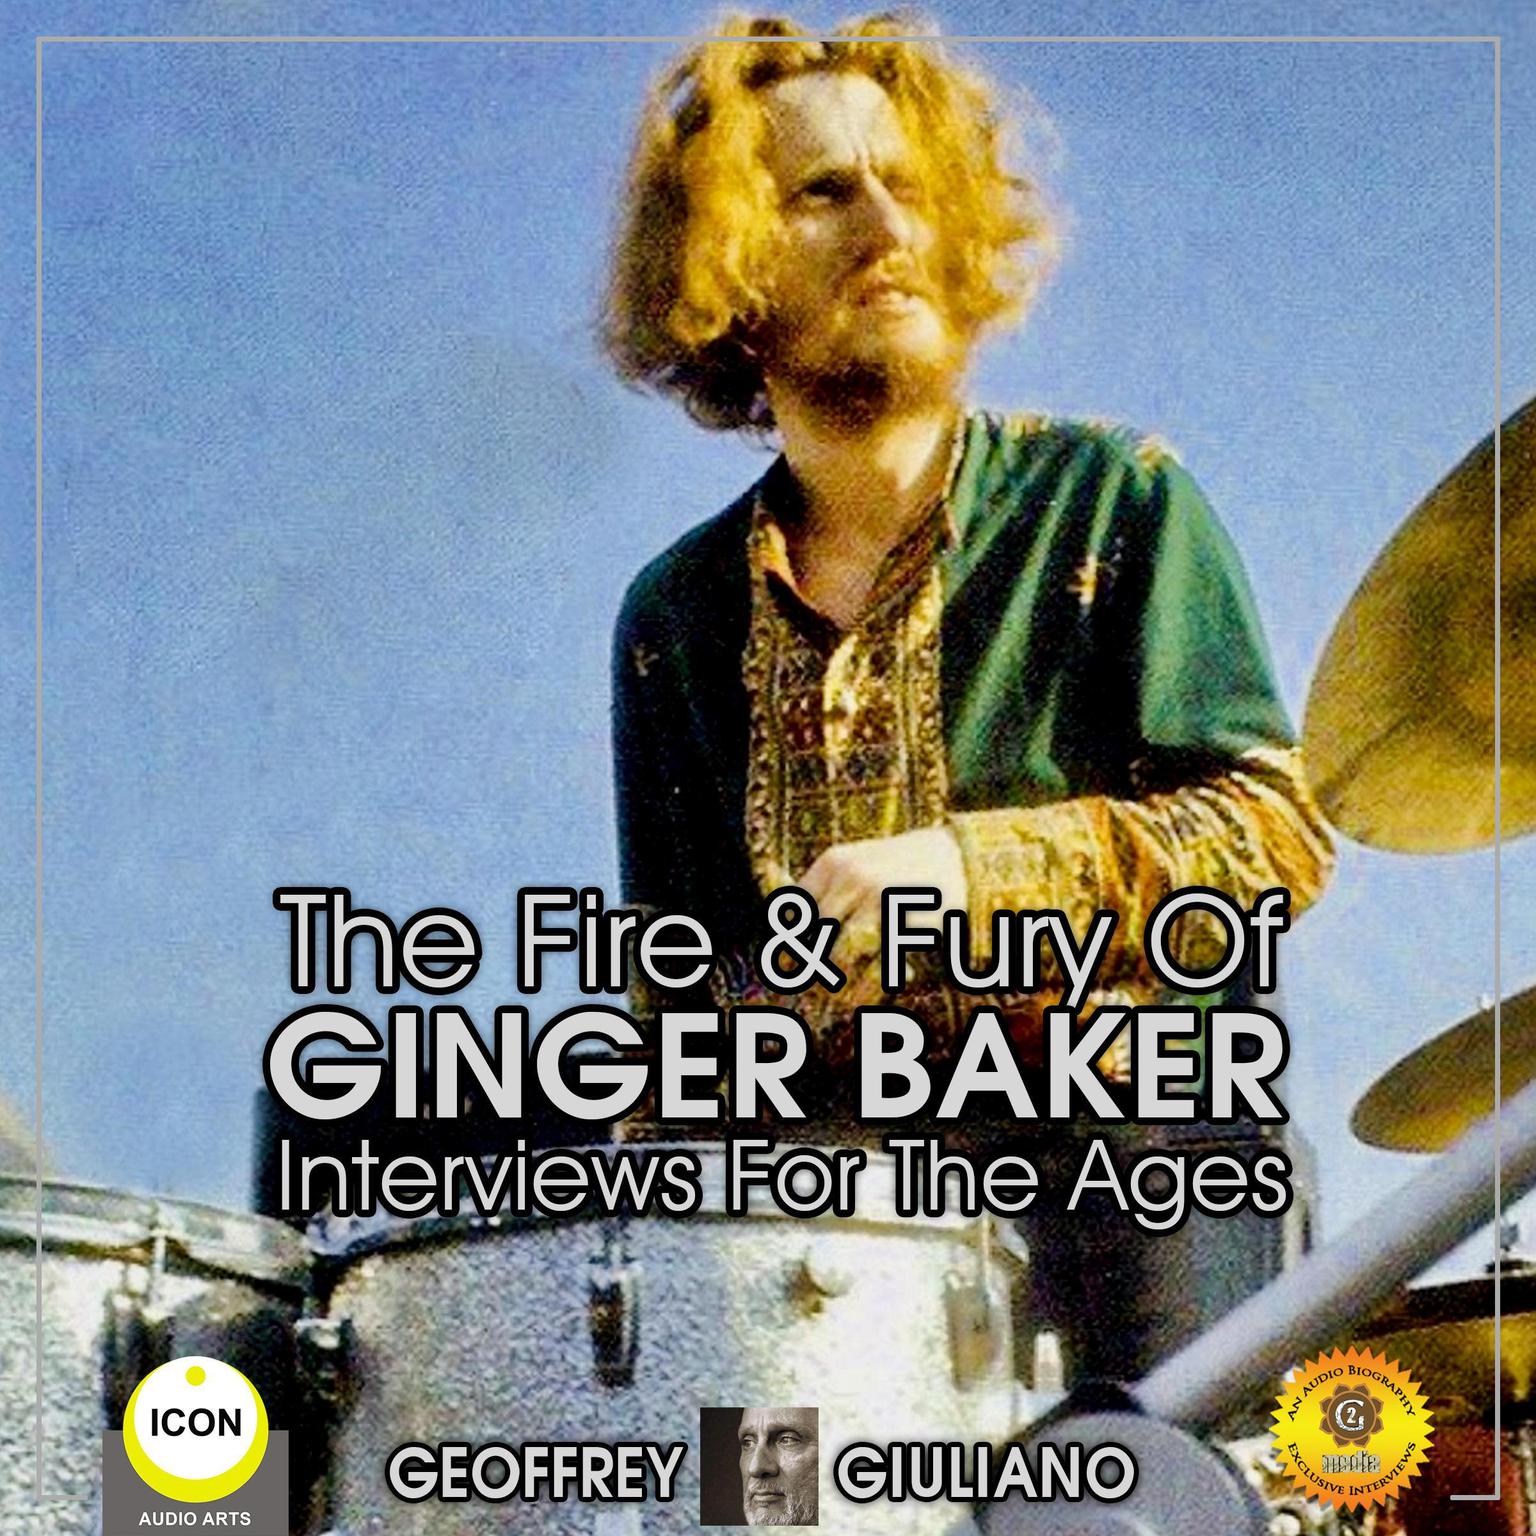 The Fire & Fury Of Ginger Baker - Interviews For The Ages Audiobook, by Geoffrey Giuliano